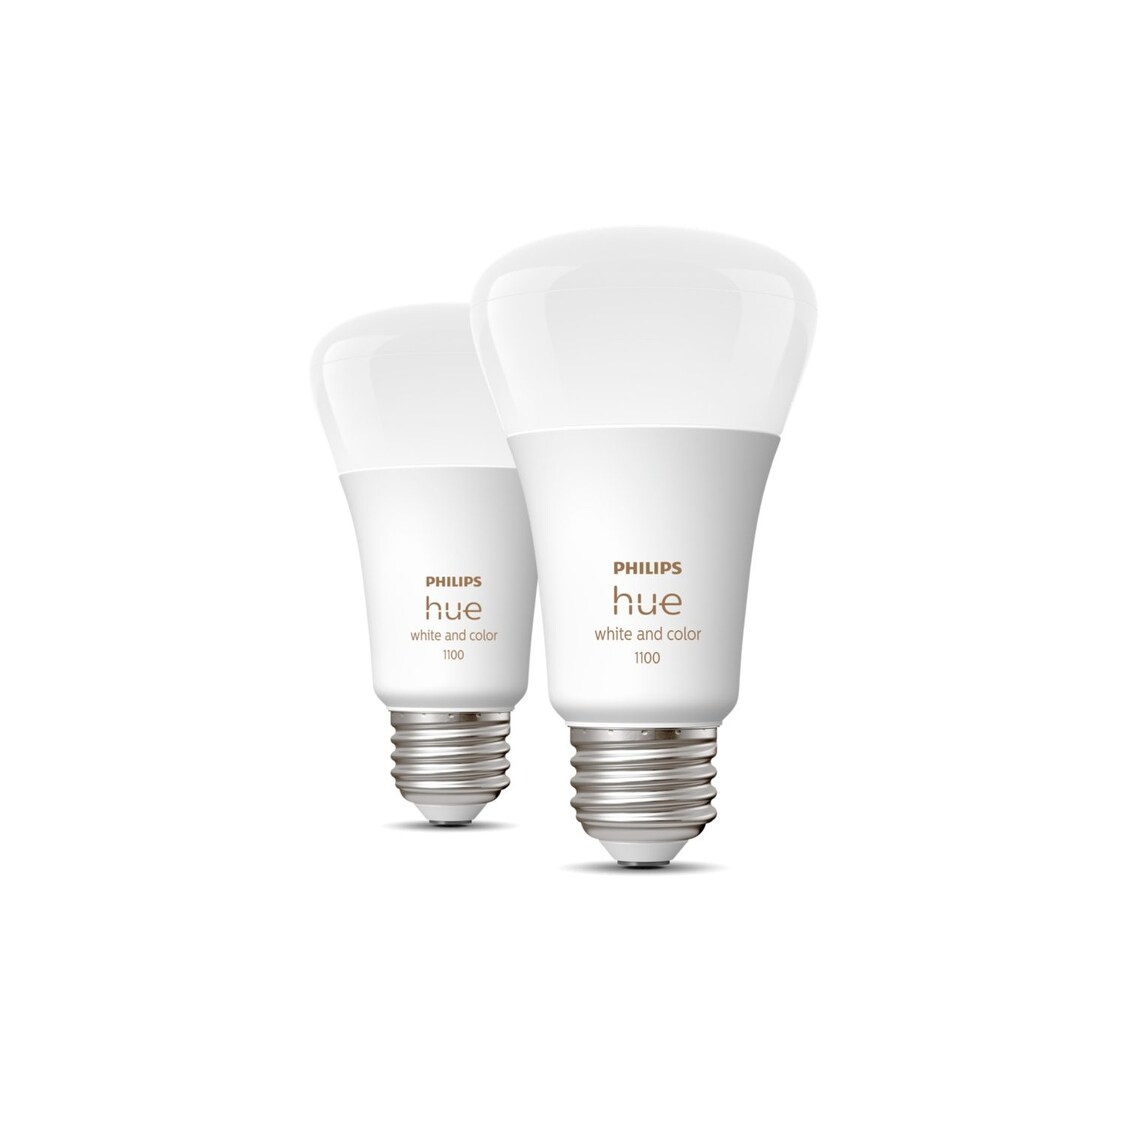 Philips Hue White and Color Ambiance A19 75W Smart Bulbs (2-pack), White - On Sale - Overstock 35639539